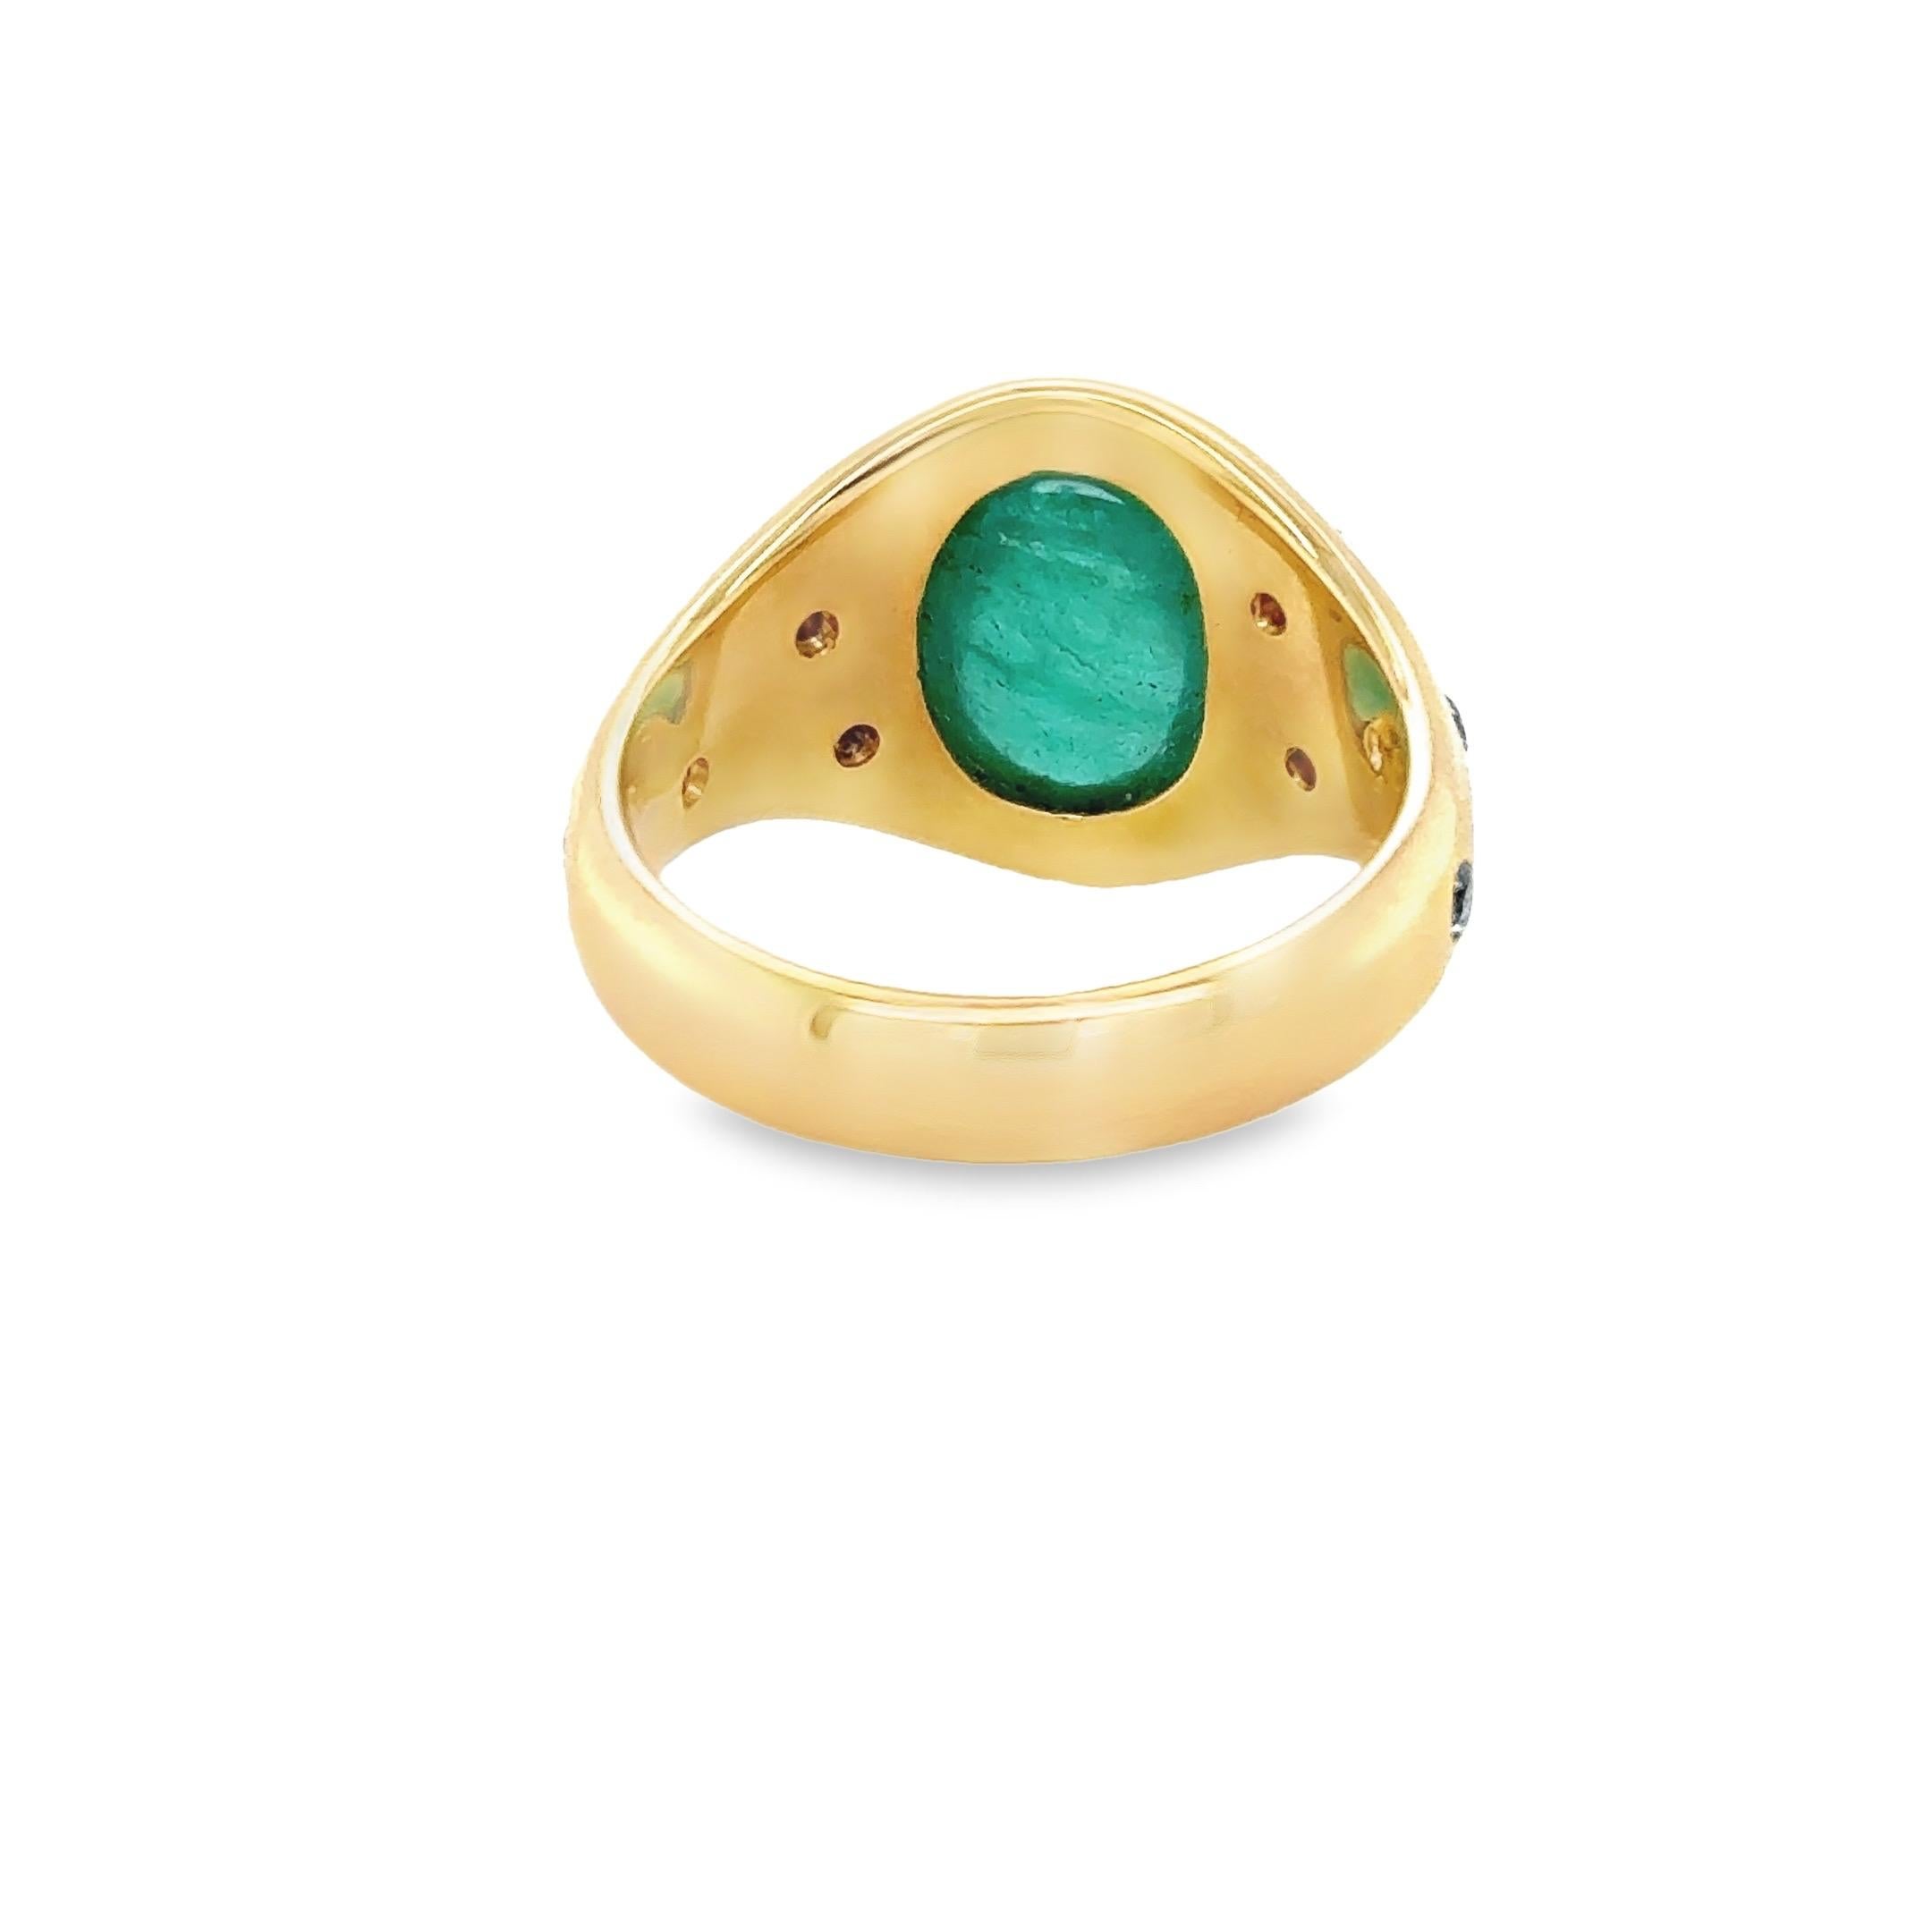 3.42 Carats Oval Cabochon Emerald & Diamond Ring In Excellent Condition For Sale In London, GB